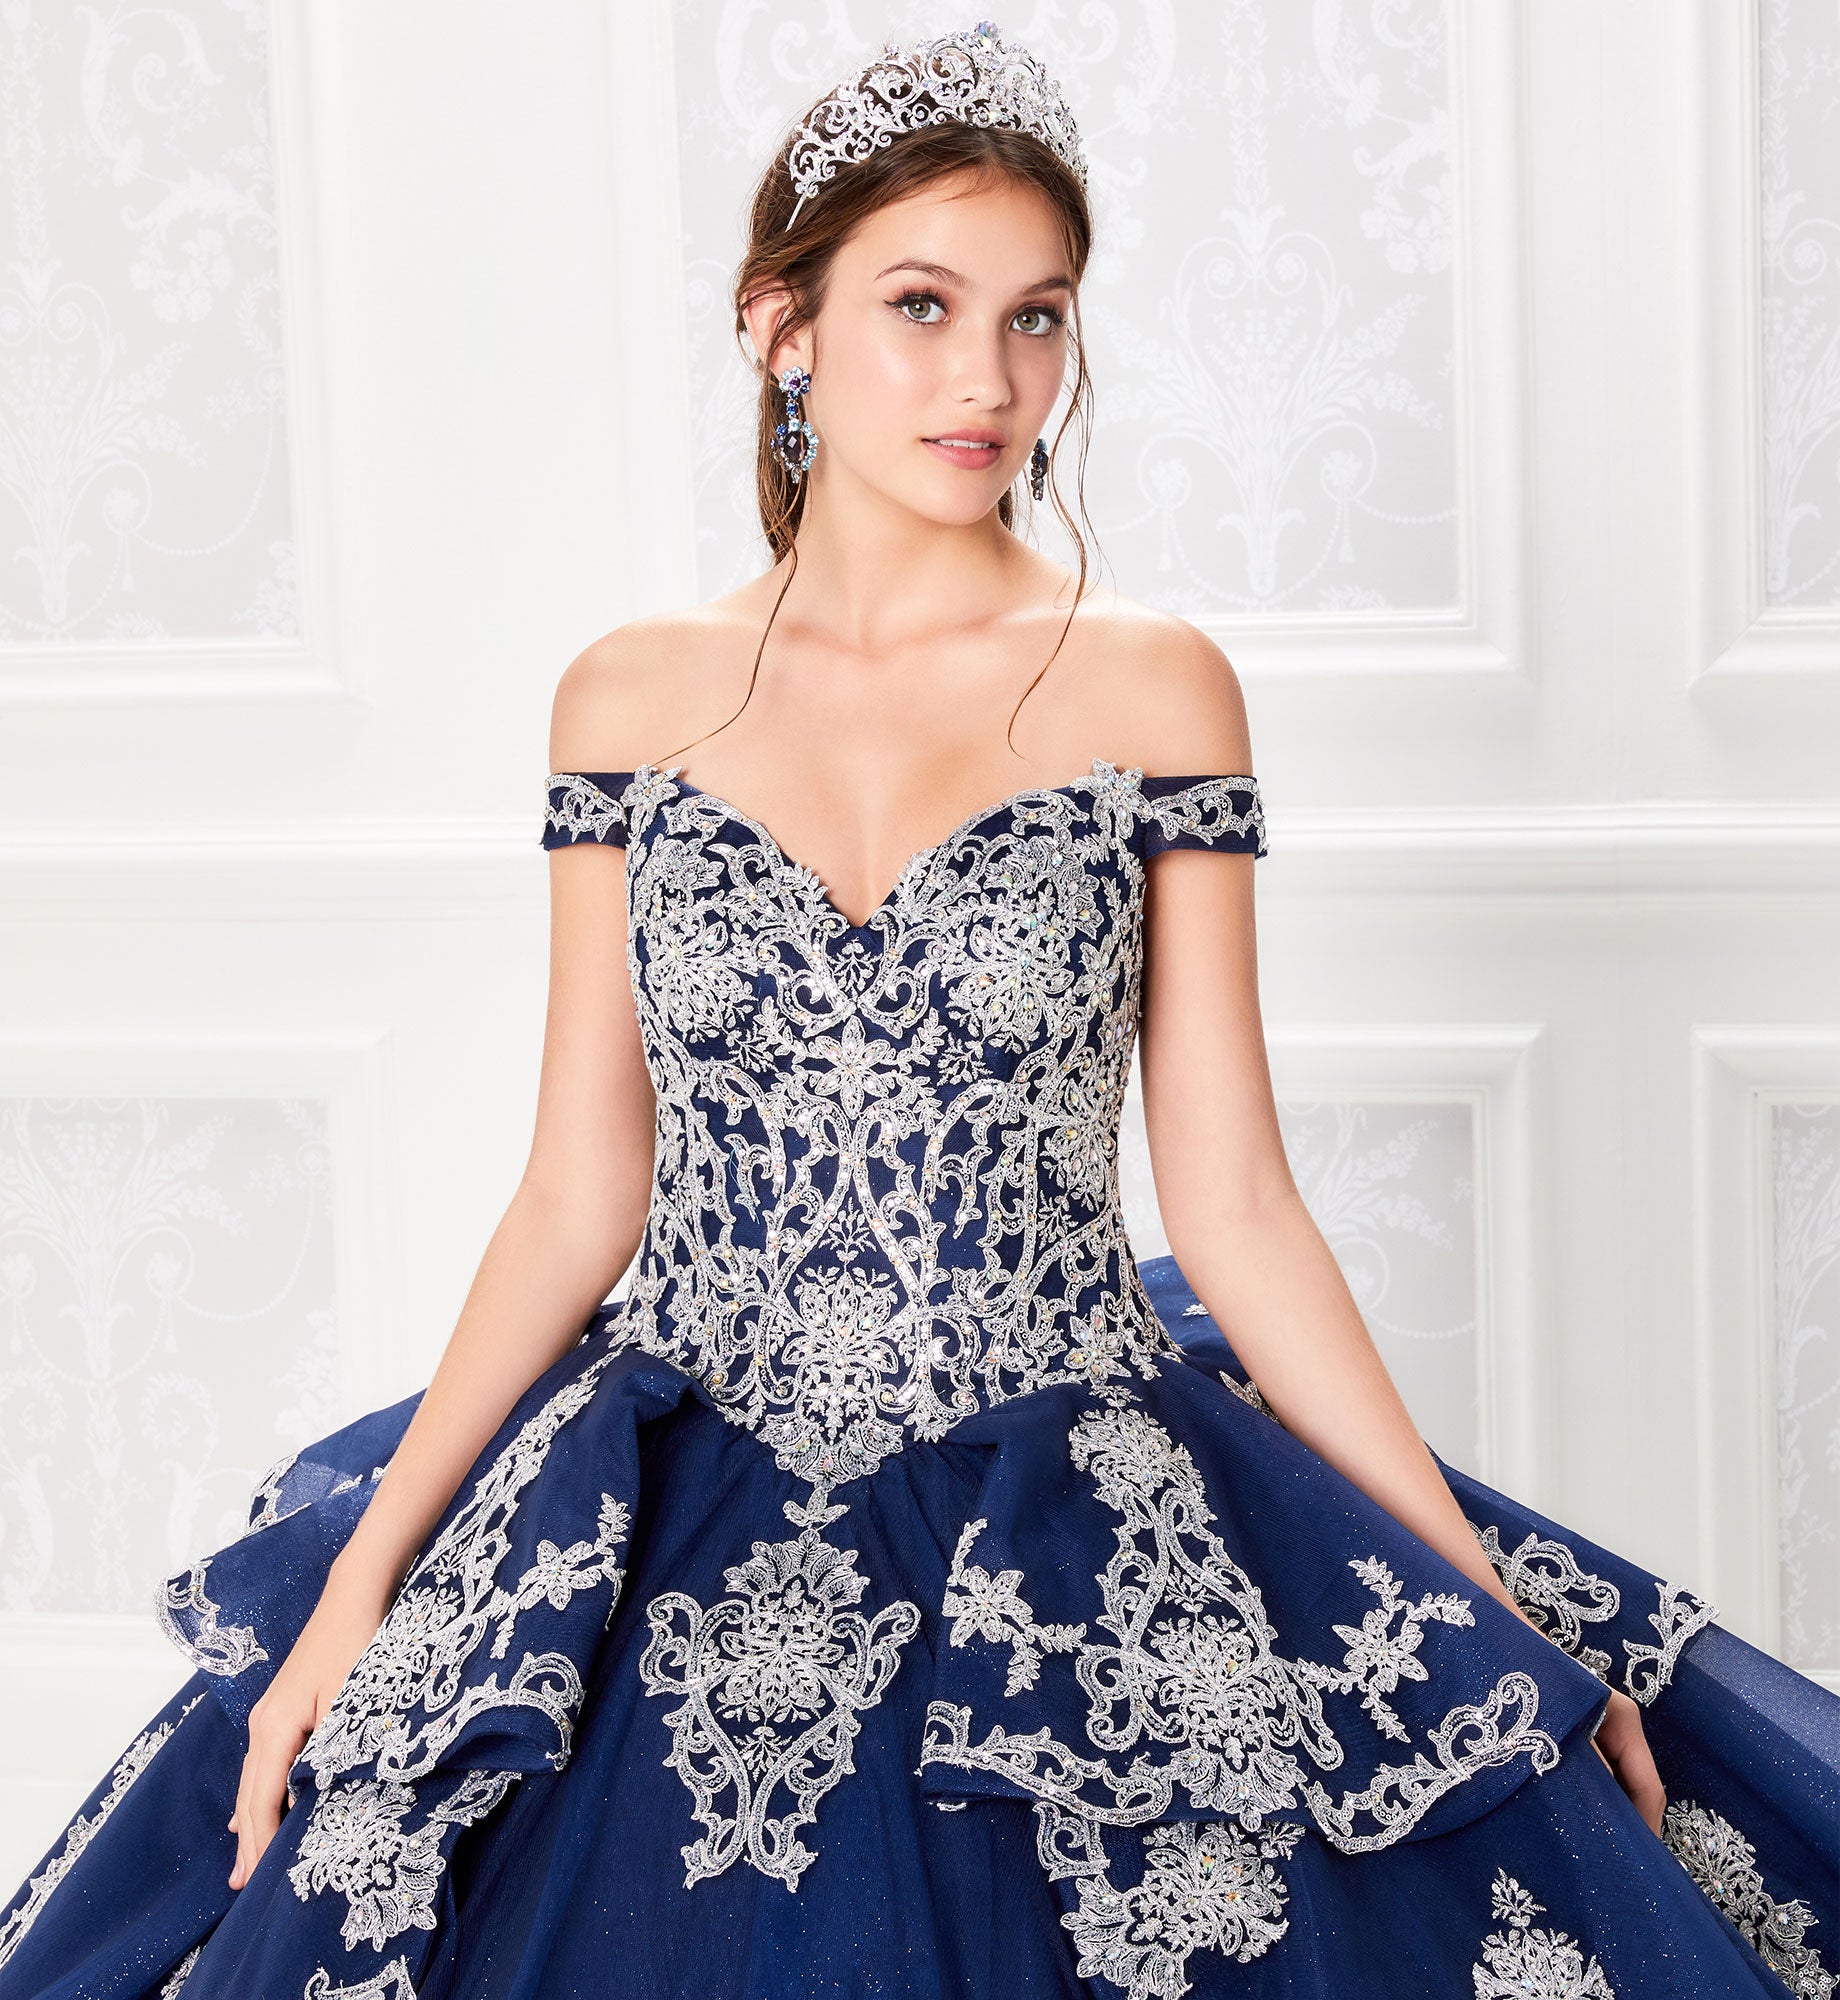 Off the shoulder quinceanera dress with cascading ruffle skirt